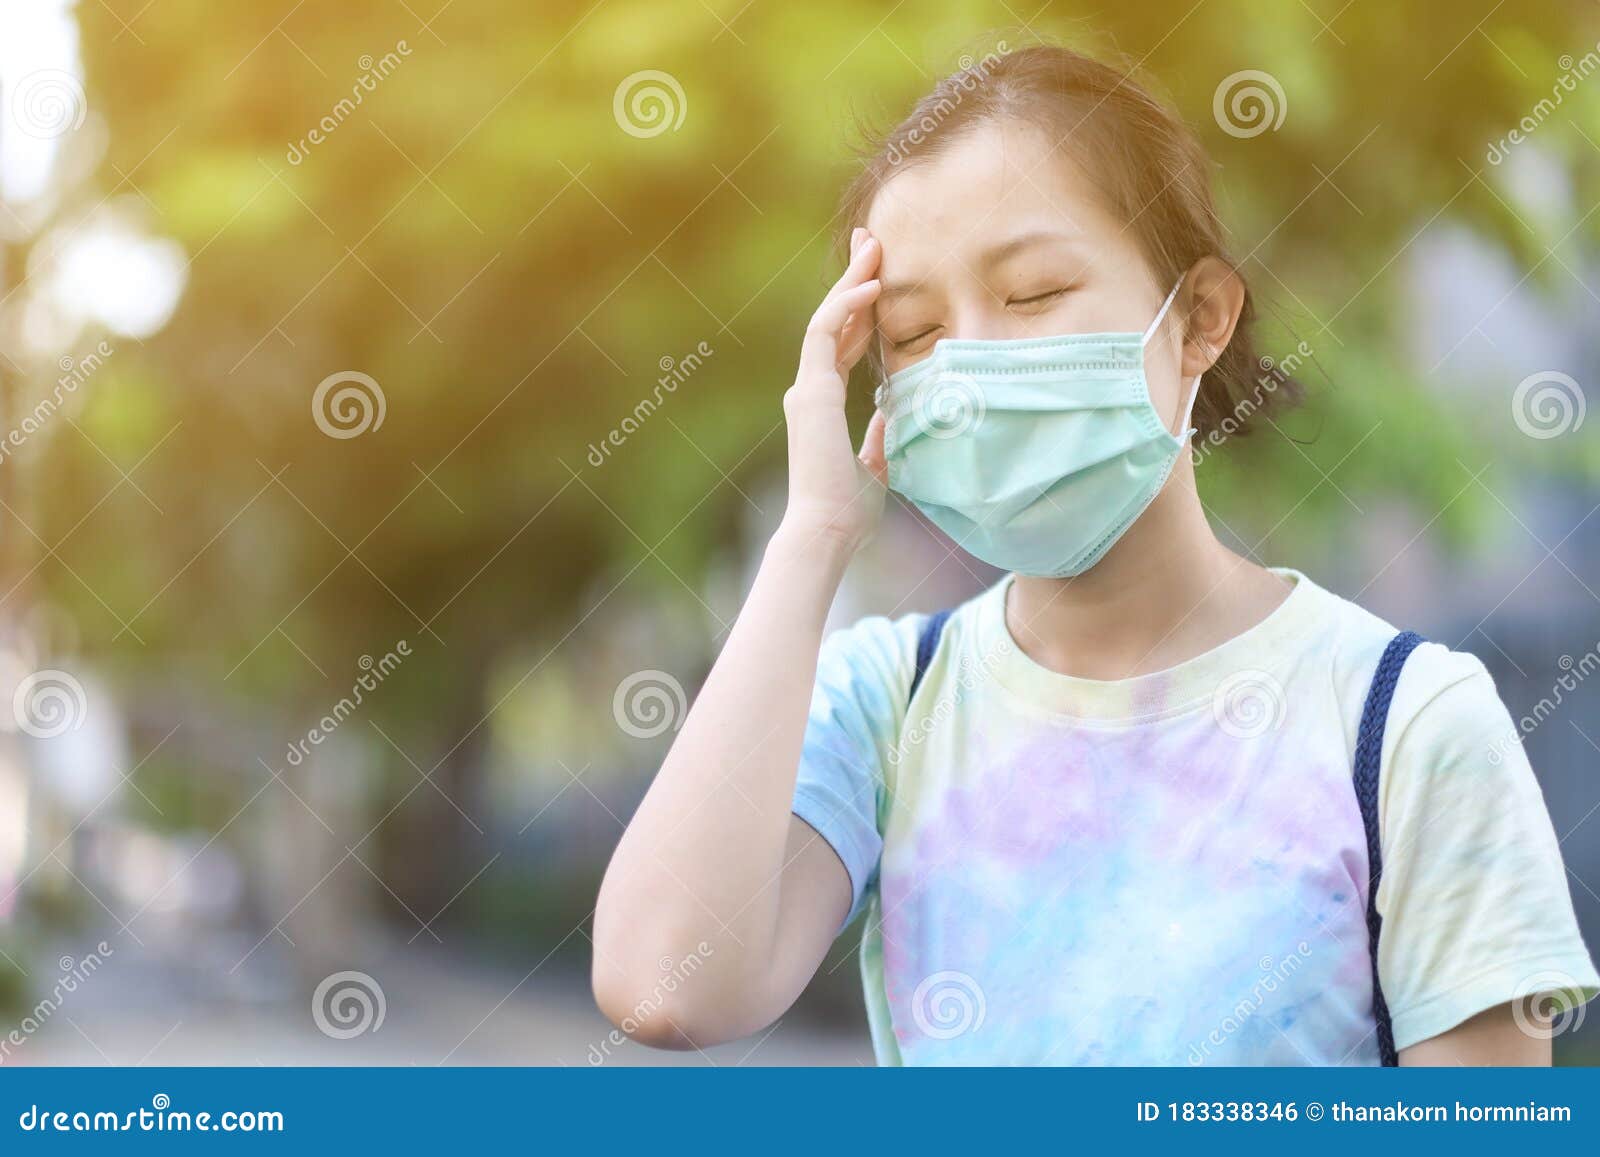 asian girl with surgical mask felling dizziness